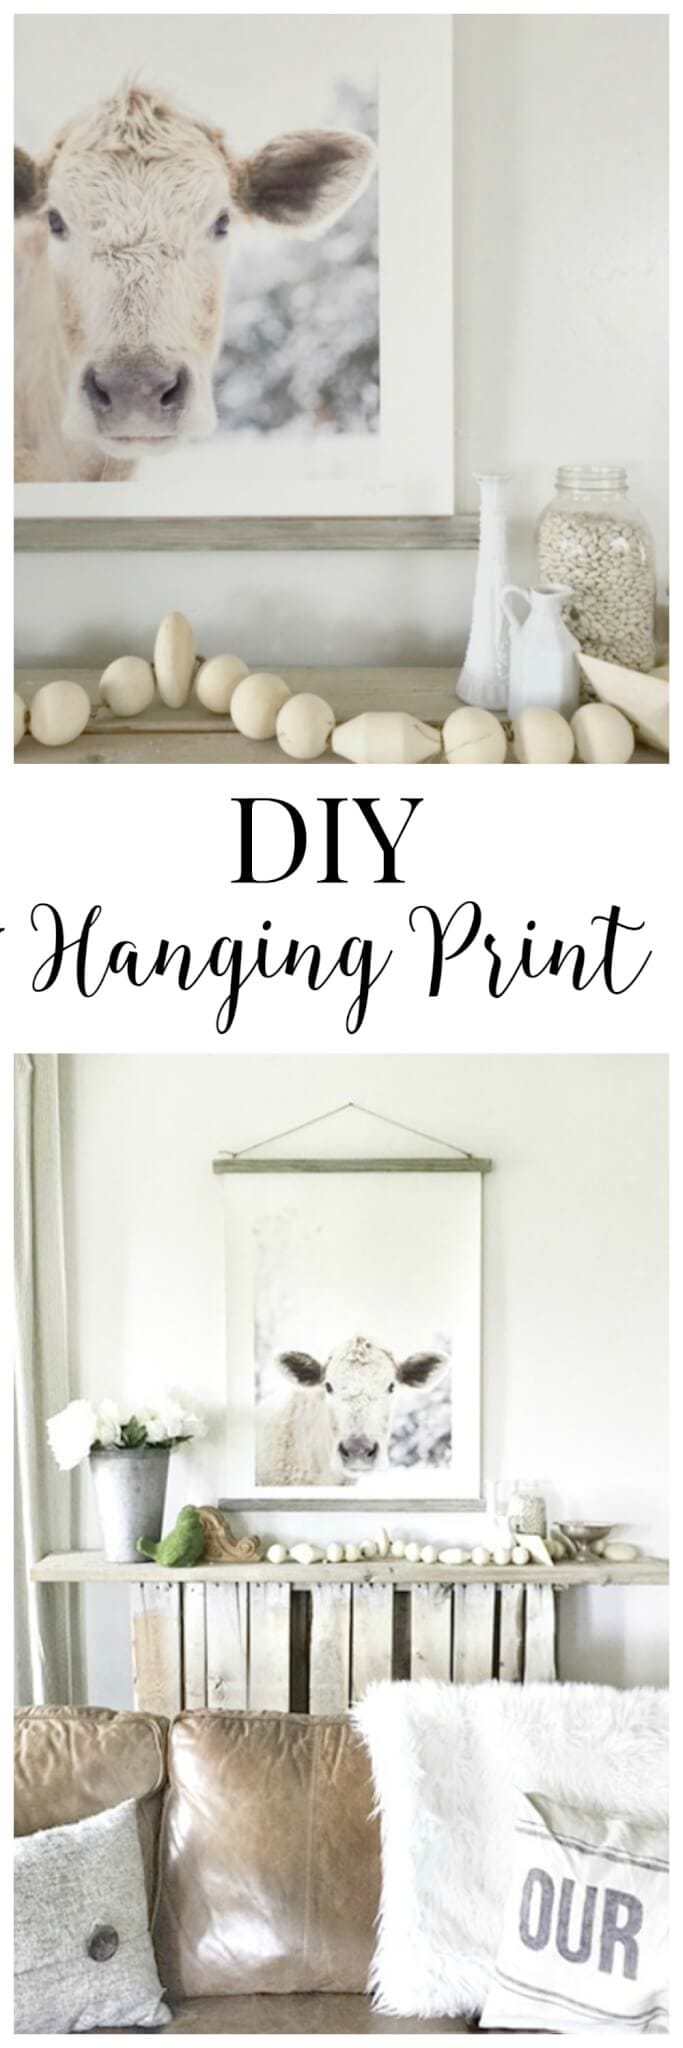 This DIY hanging print with a barnwood finish is so great. This print is so beautiful.